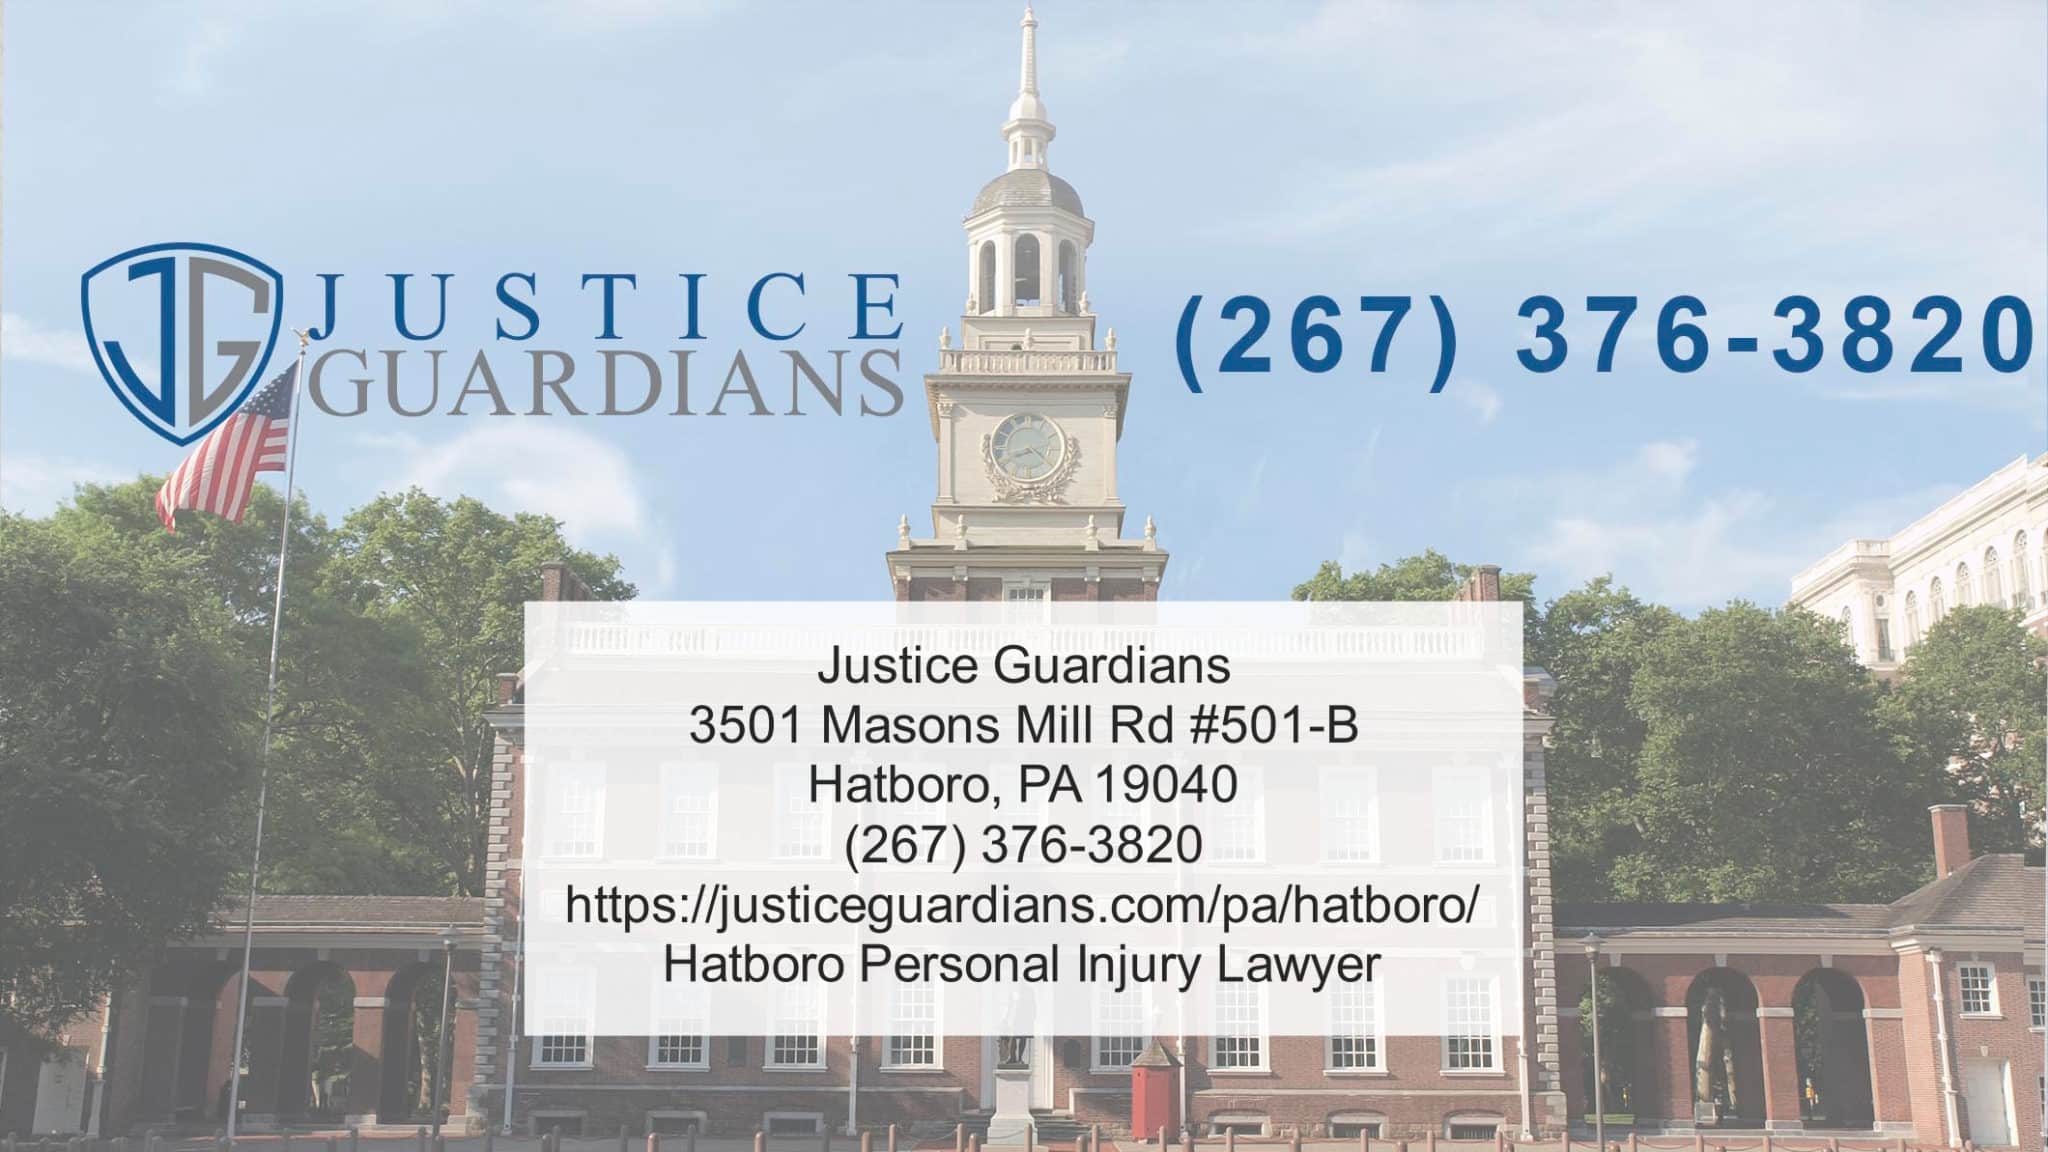 Personal-Injury-Lawyer-Near-Me-Hatboro-Justice-Guardians-scaled-1.jpeg